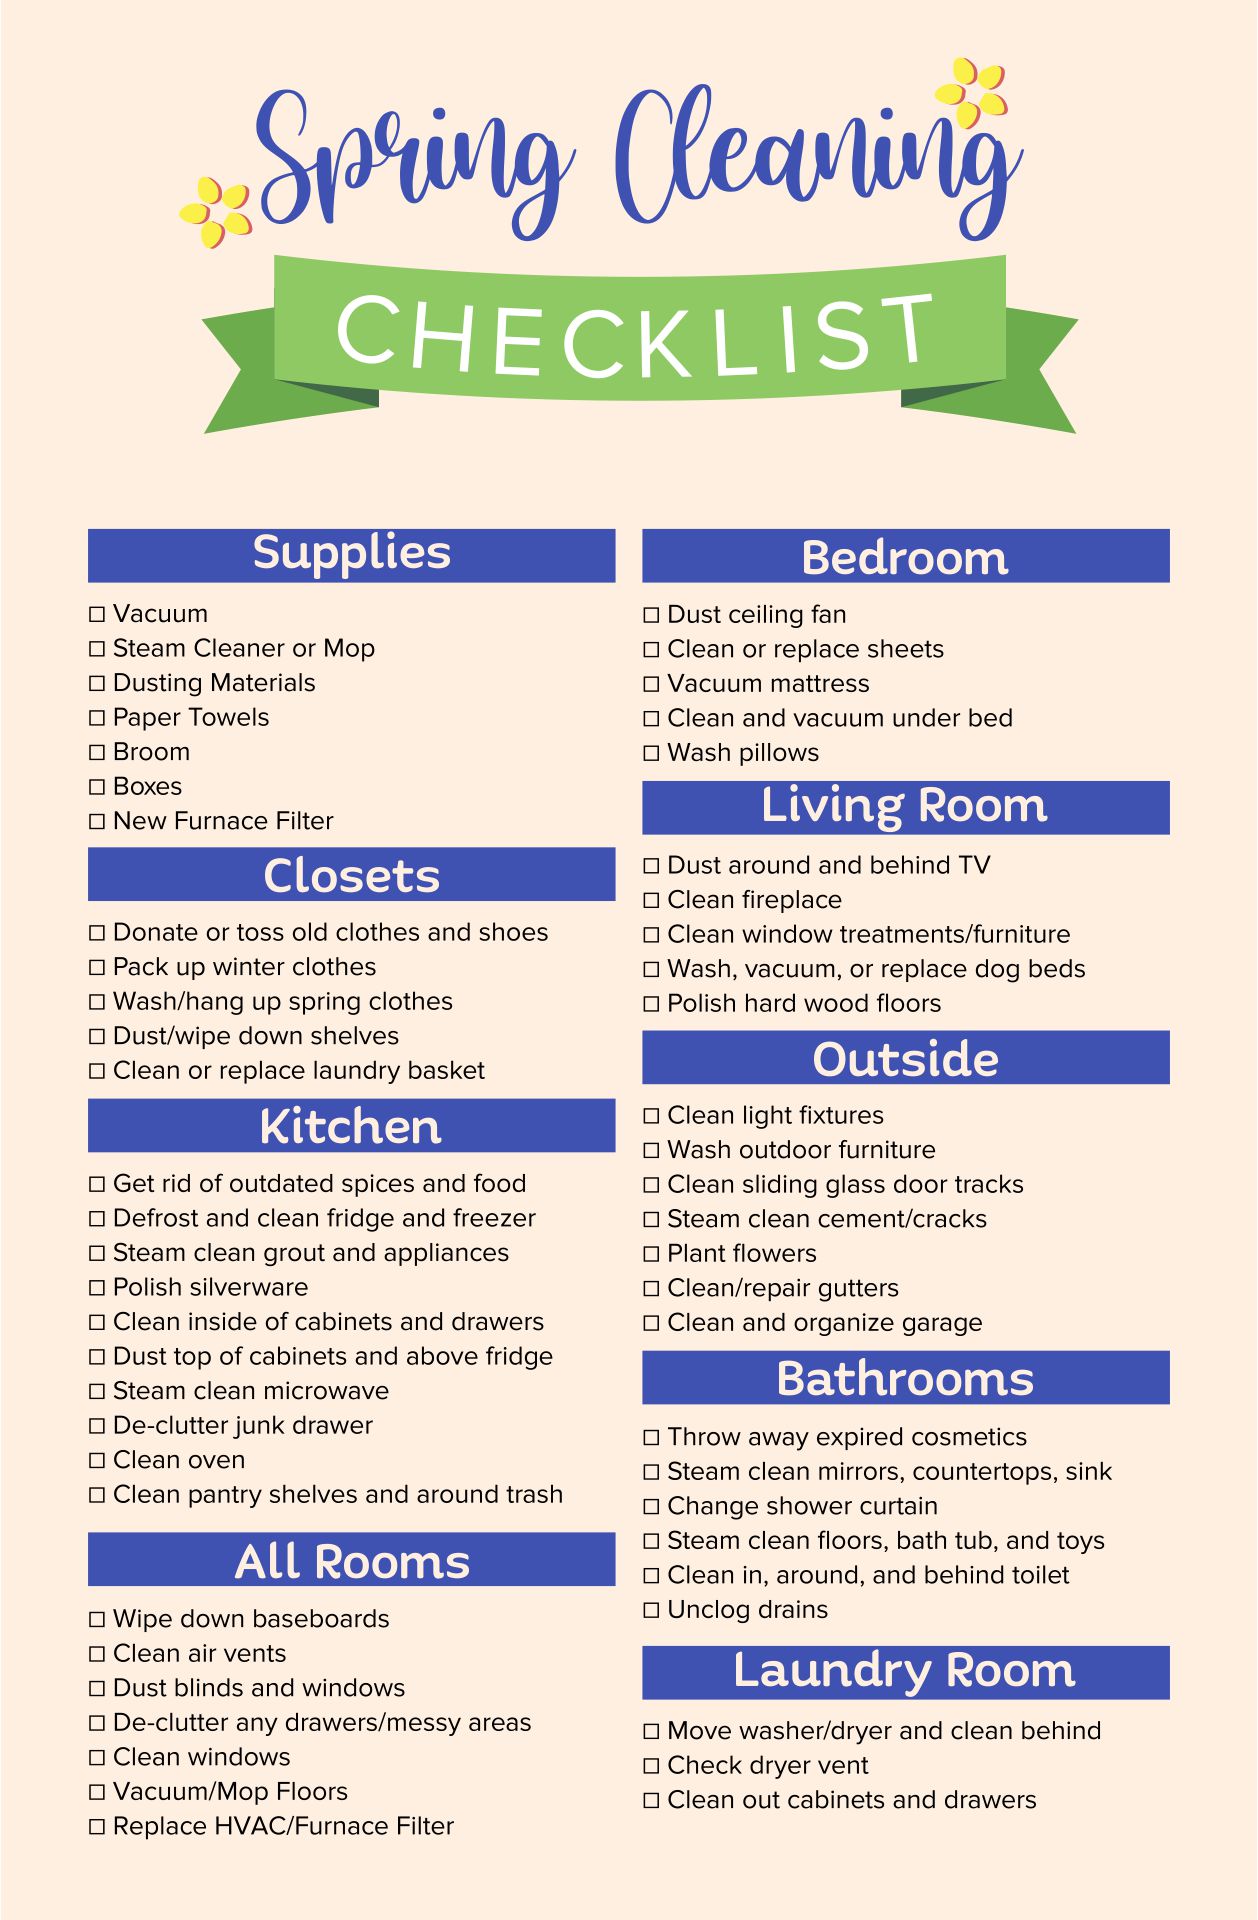 6-best-images-of-church-cleaning-checklist-printable-spring-cleaning